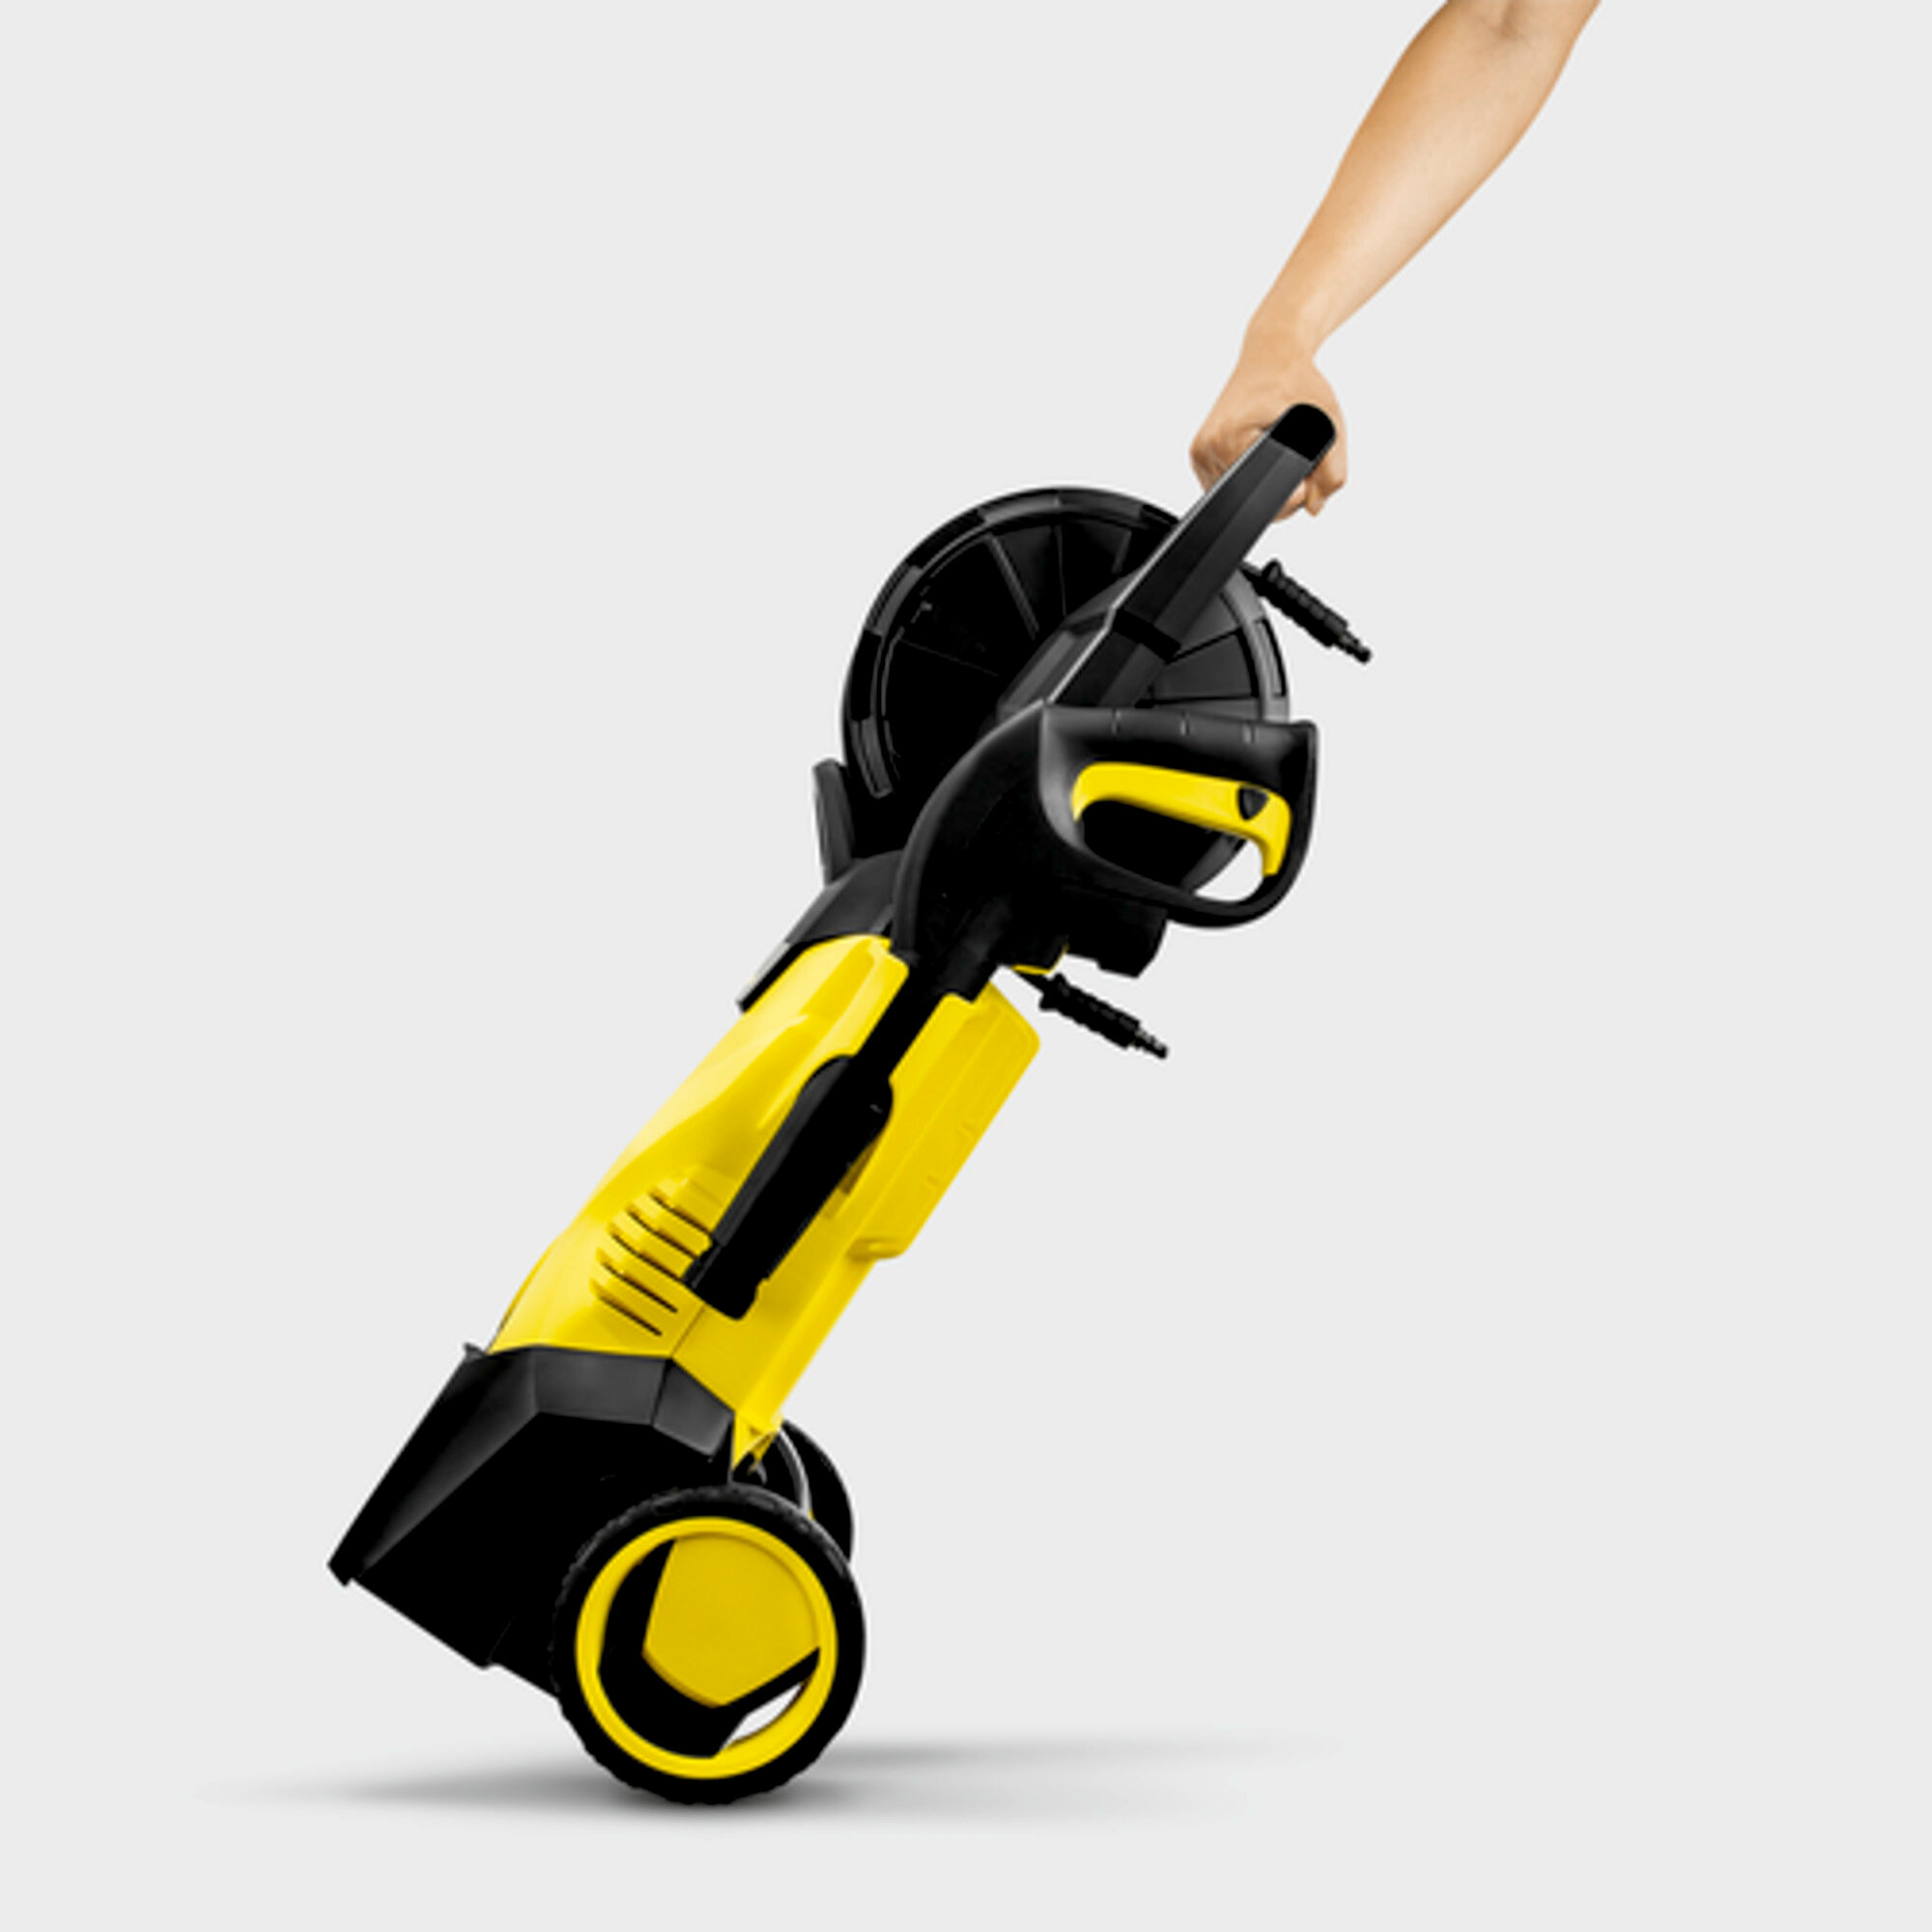 Pressure washer K 3 HR Plus: Smooth-running wheels and long handle